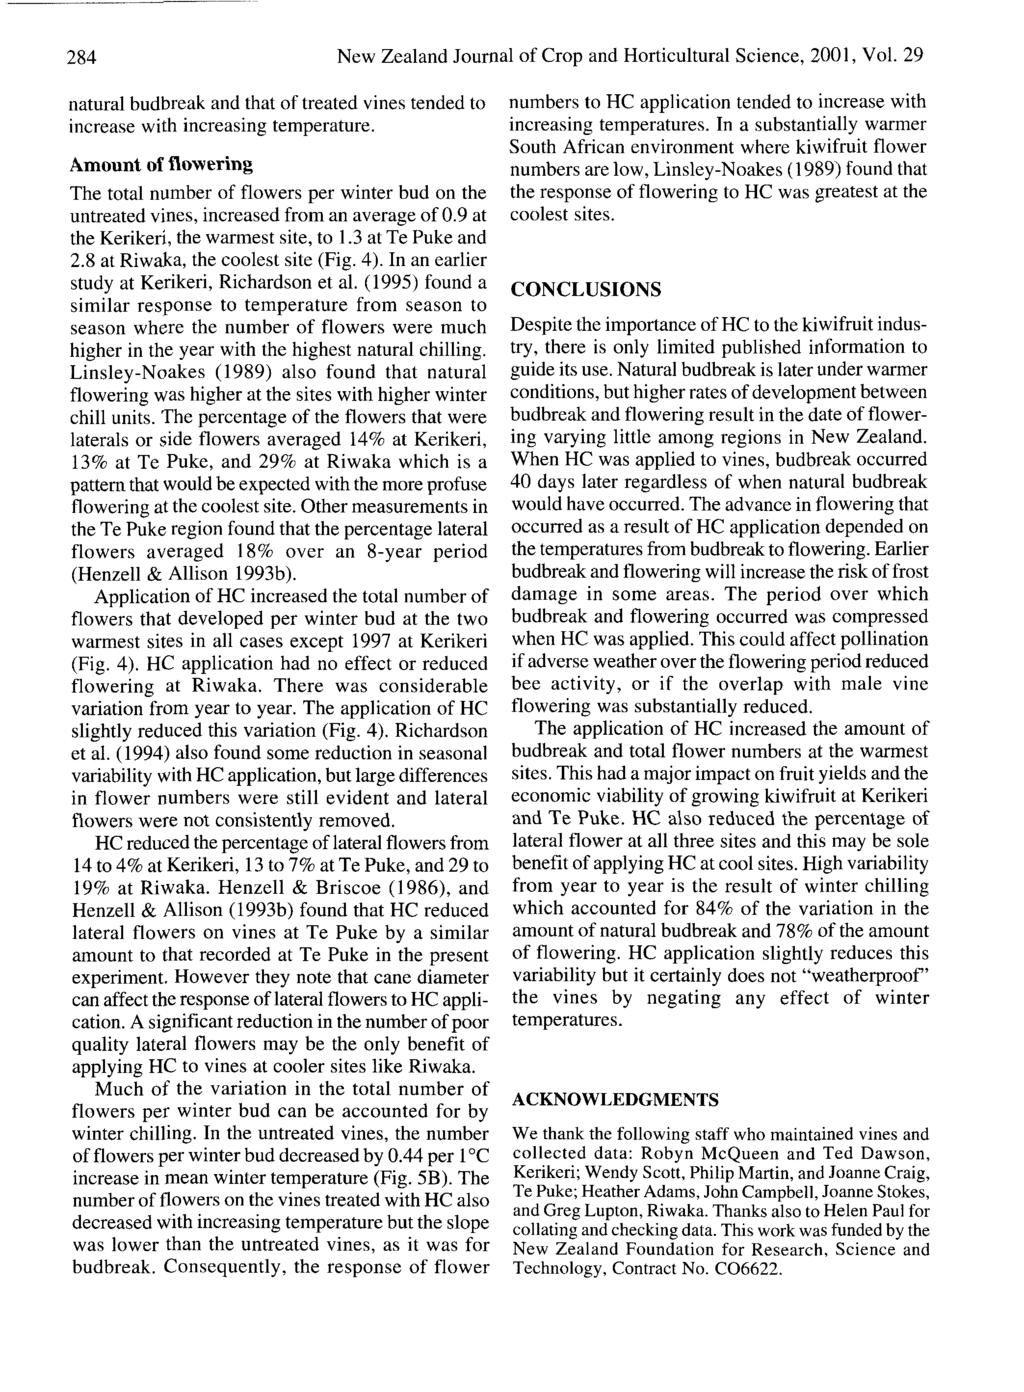 284 New Zealand Jurnal f Crp and Hrticultural Science, 2001, Vl. 29 natural budbreak and that f treated vines tended t increase with increasing temperature.